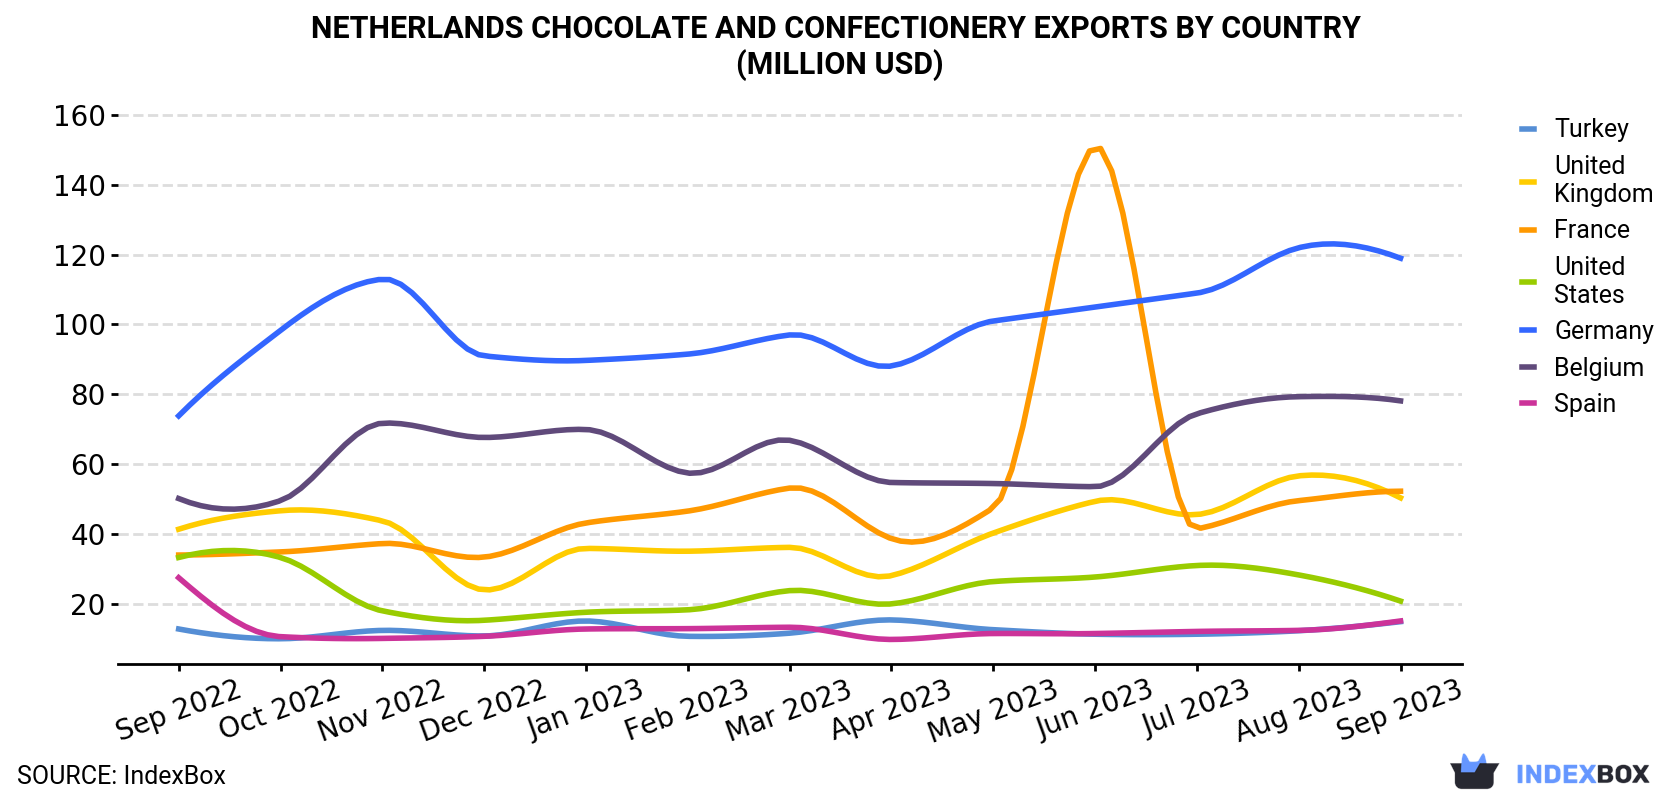 Netherlands Chocolate And Confectionery Exports By Country (Million USD)